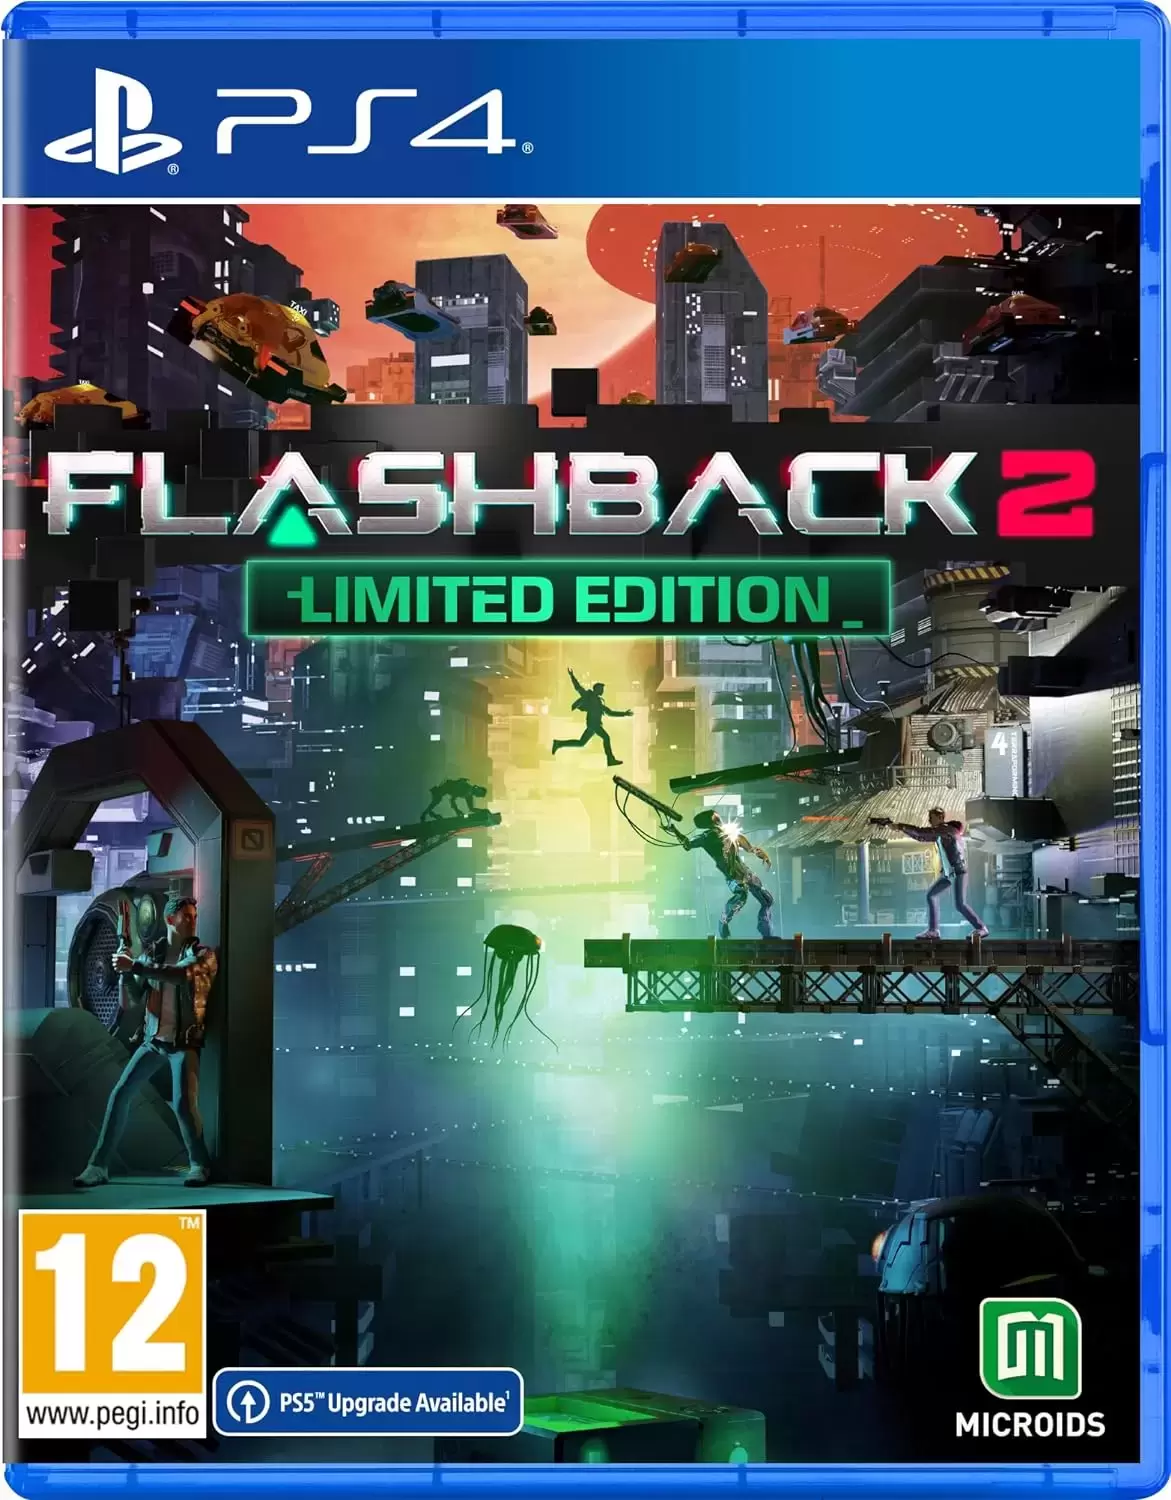 PS4 Games - Flashback 2 : Limited Edition